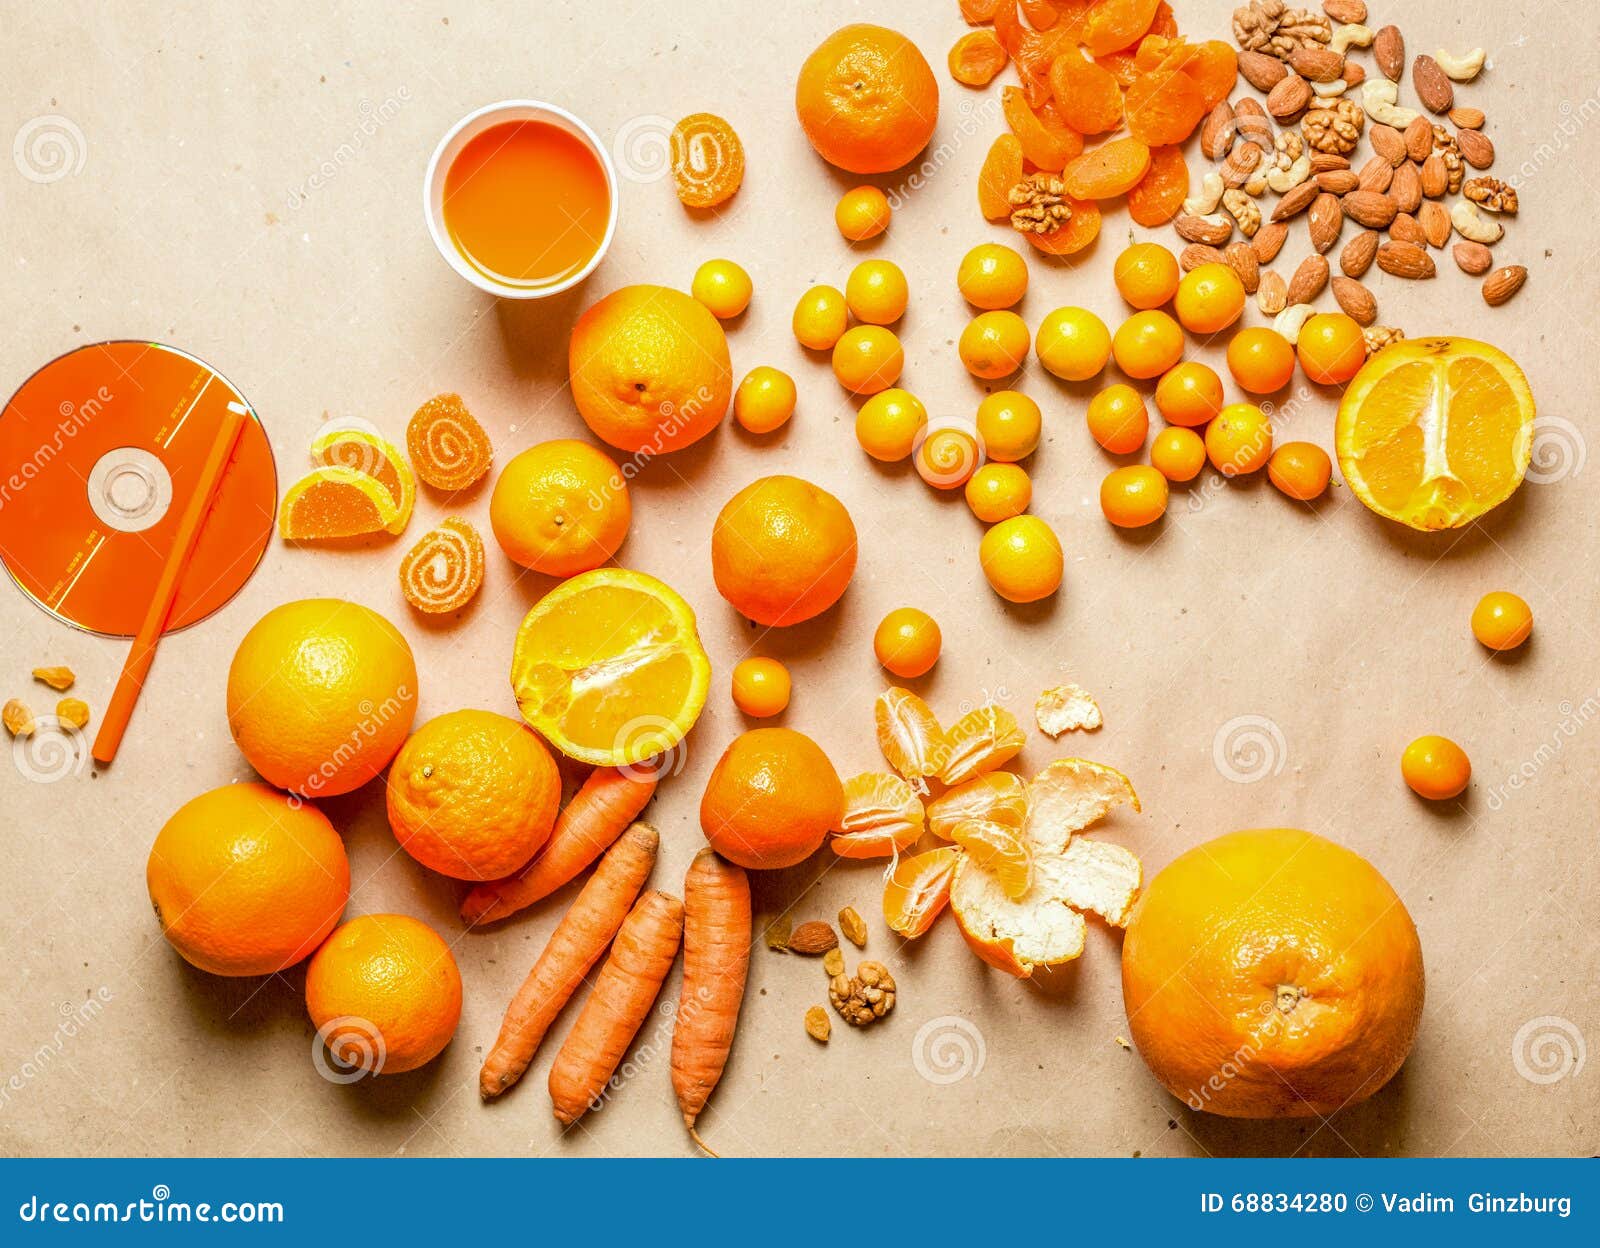 The Composition of the Orange Fruits and Vegetables Stock Photo - Image ...